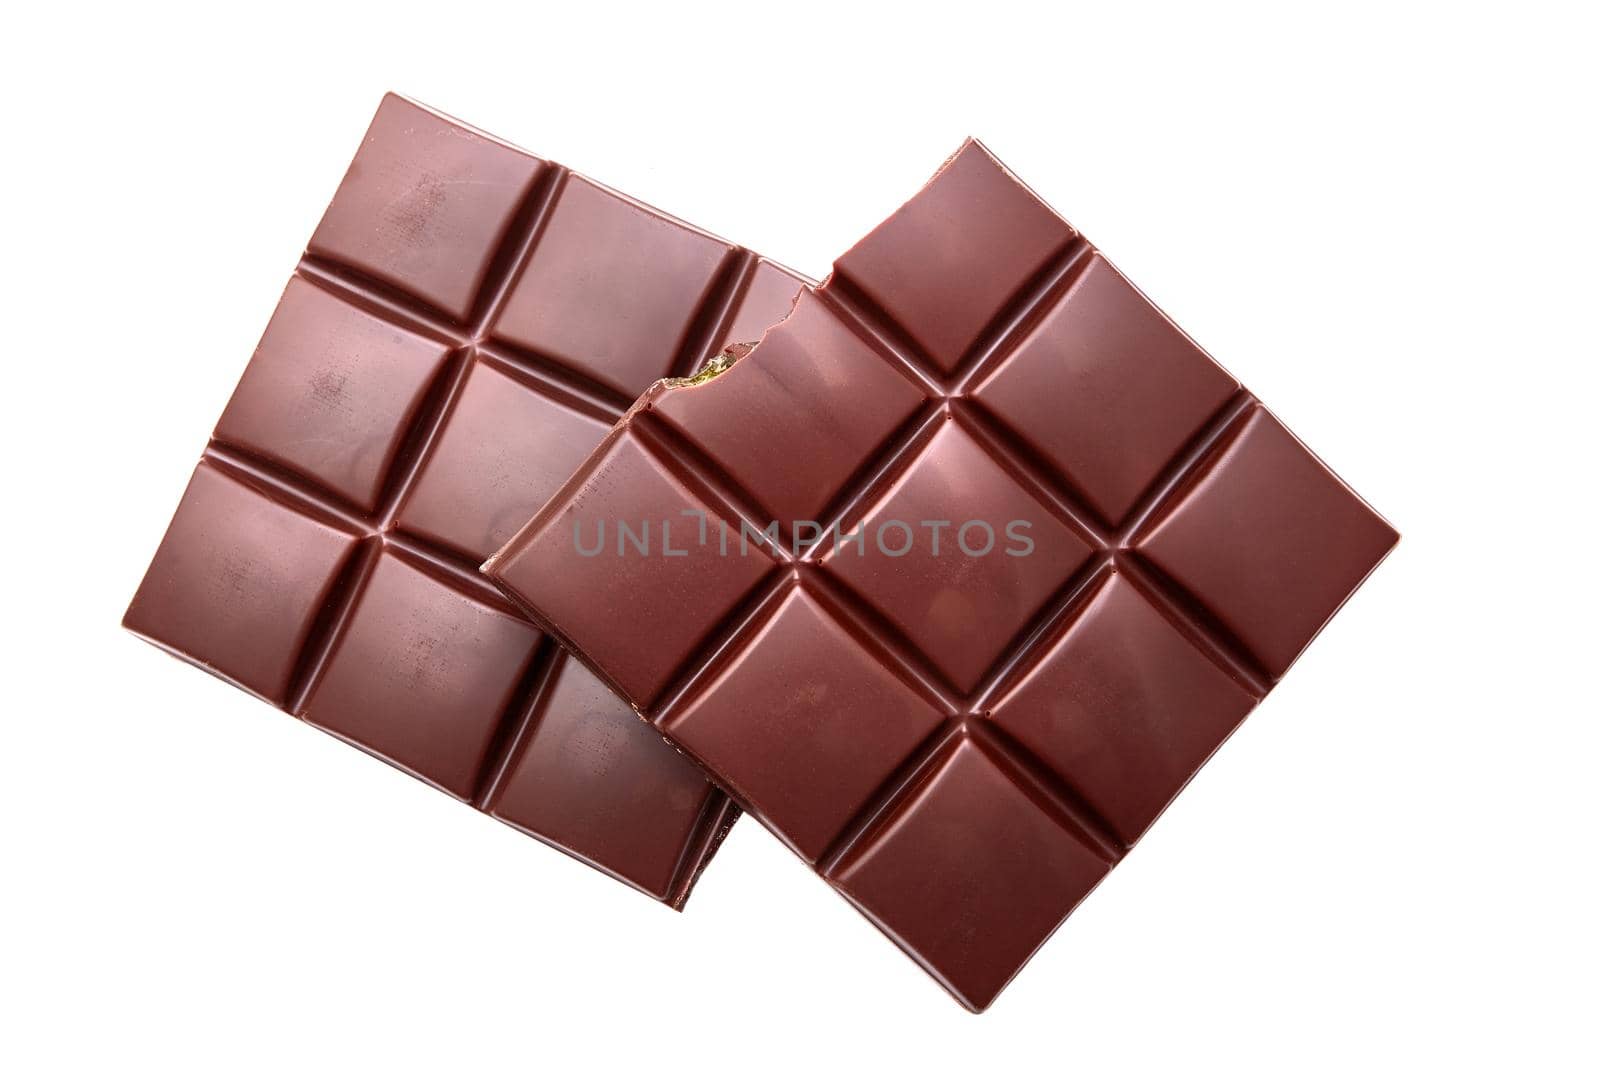 two pieces of chocolate isolated on white close-up